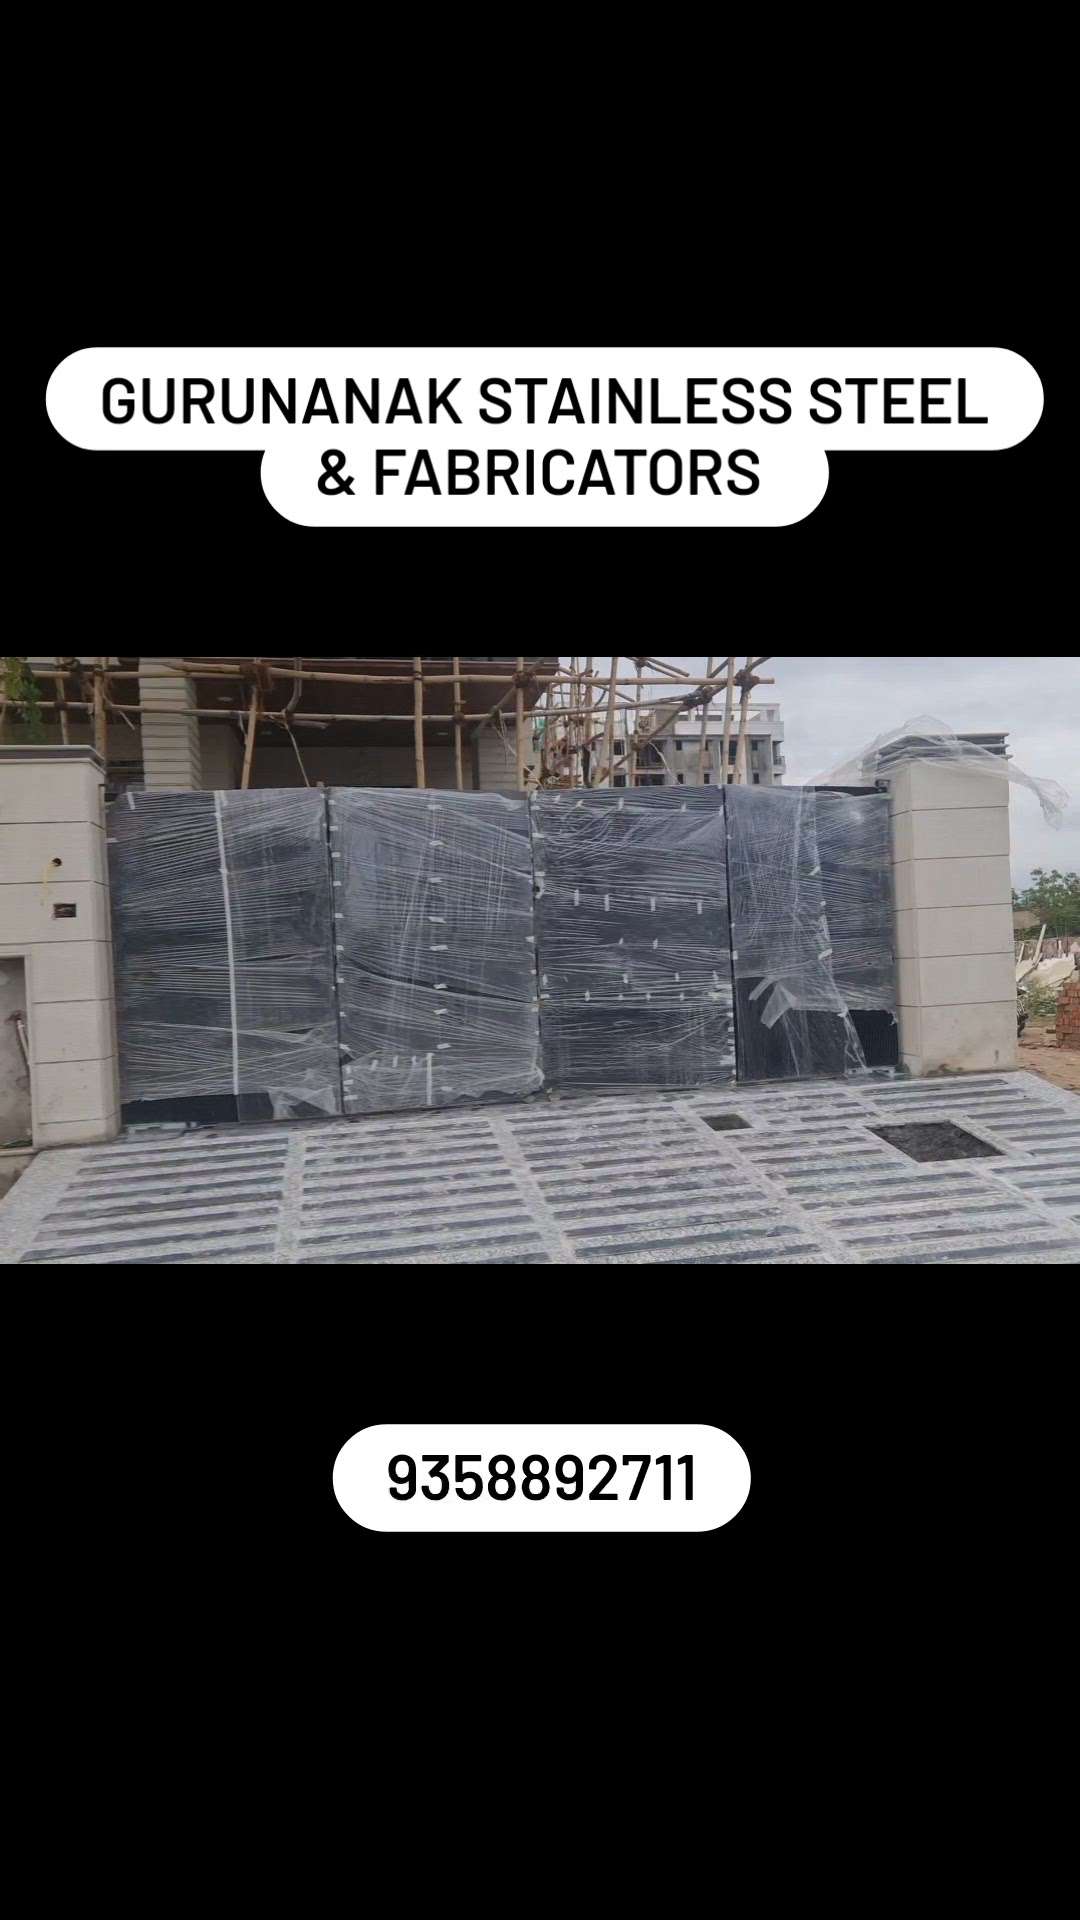 Gurunanak Stainless Steel & Fabricators
Specialists in customised Aluminium profile gates, Steel & Glass railings, Classic Iron gate, & Modern metal furniture.
If you can dream it.. we can build it…!!
#steelfabricators #designergates #moderngates #automaticslidinggates 
#aluminiumprofilegate 
#maingatedesign #GodigitalLock #customisedprofilegates #steel&glassRailing #classicirongate#classicironRailing